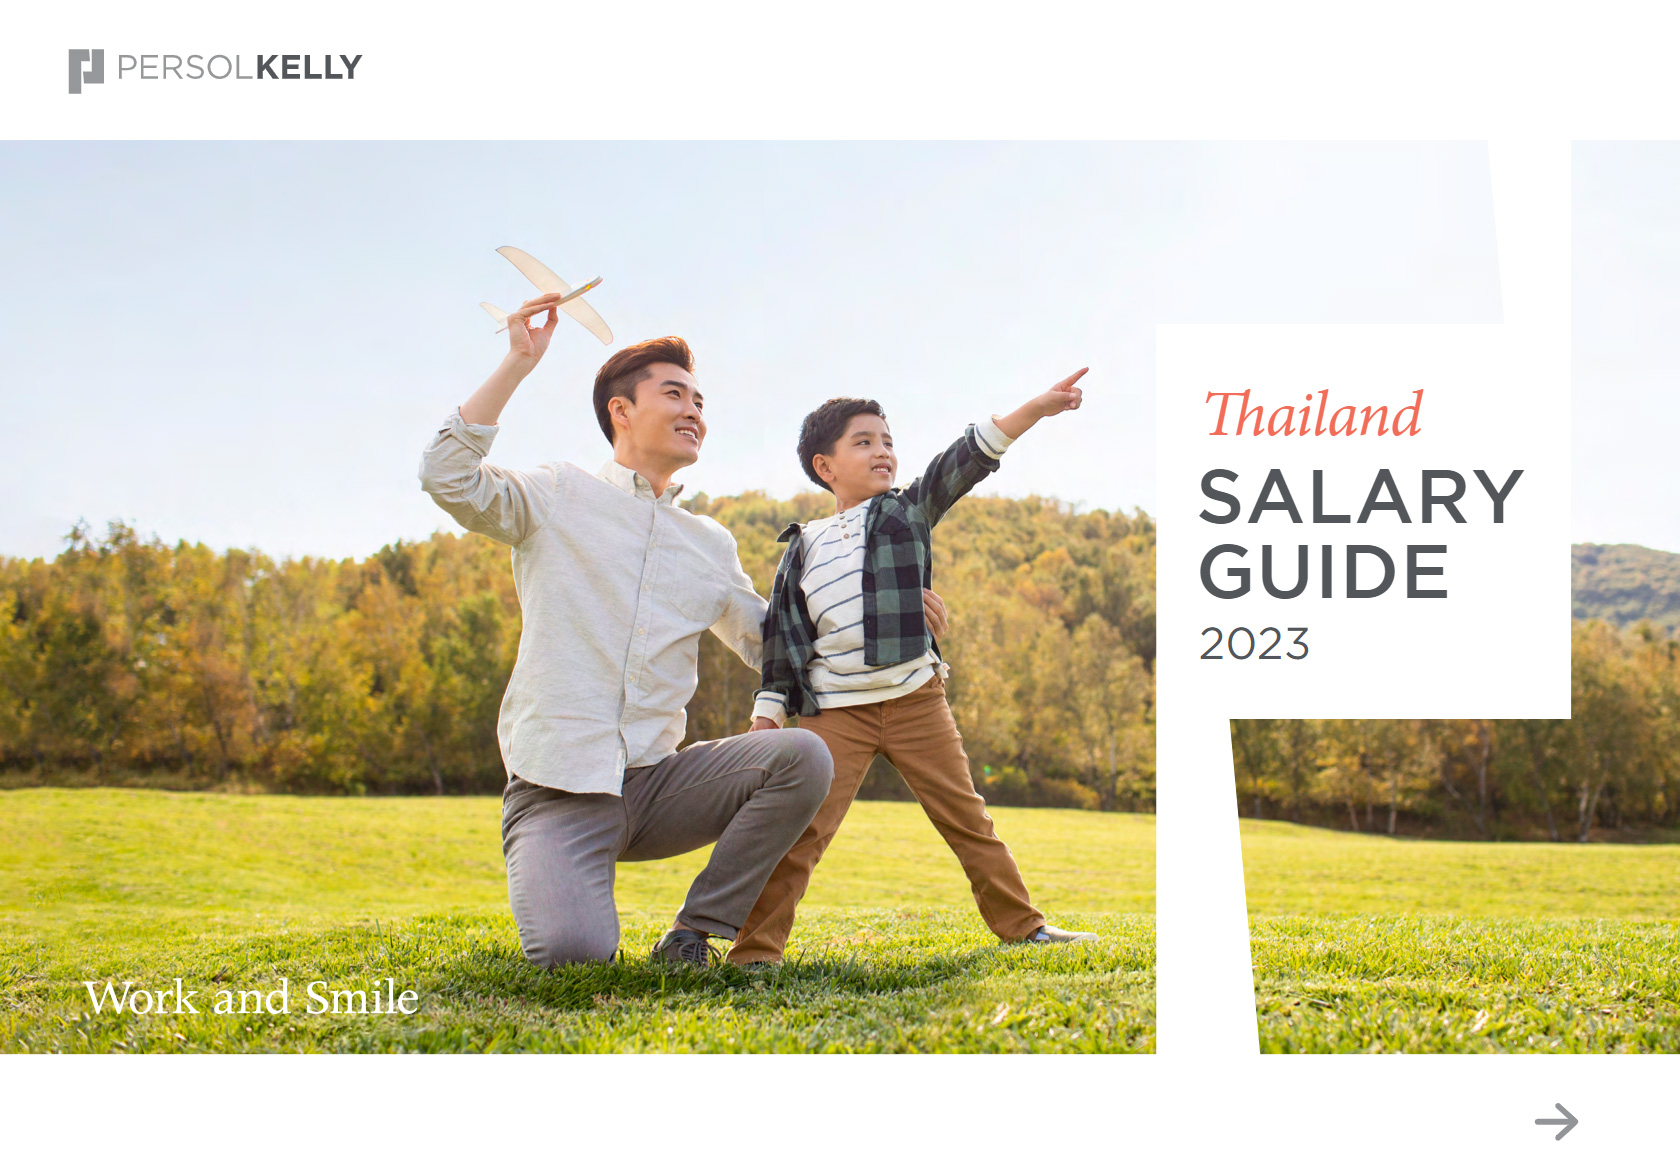 Thailand Salary Guide 2023